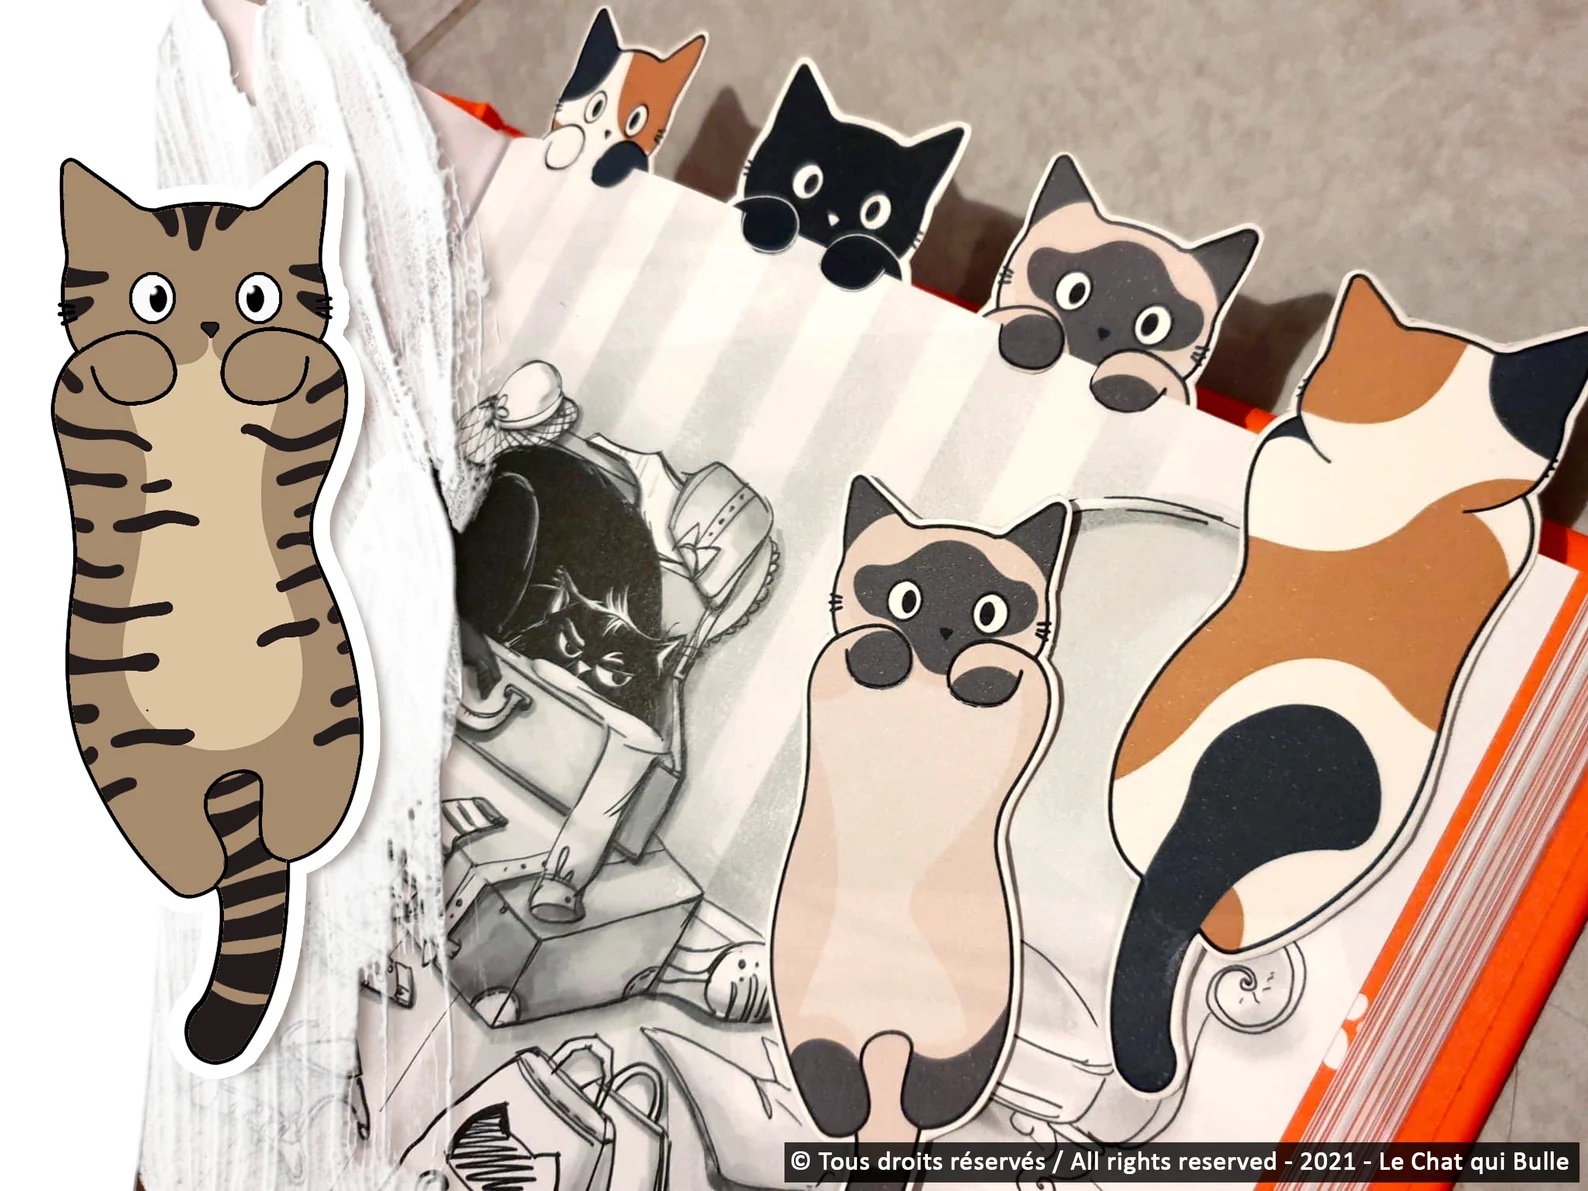 a photo of paper cats in several different color variations. They hang off a book's pages as book marks.